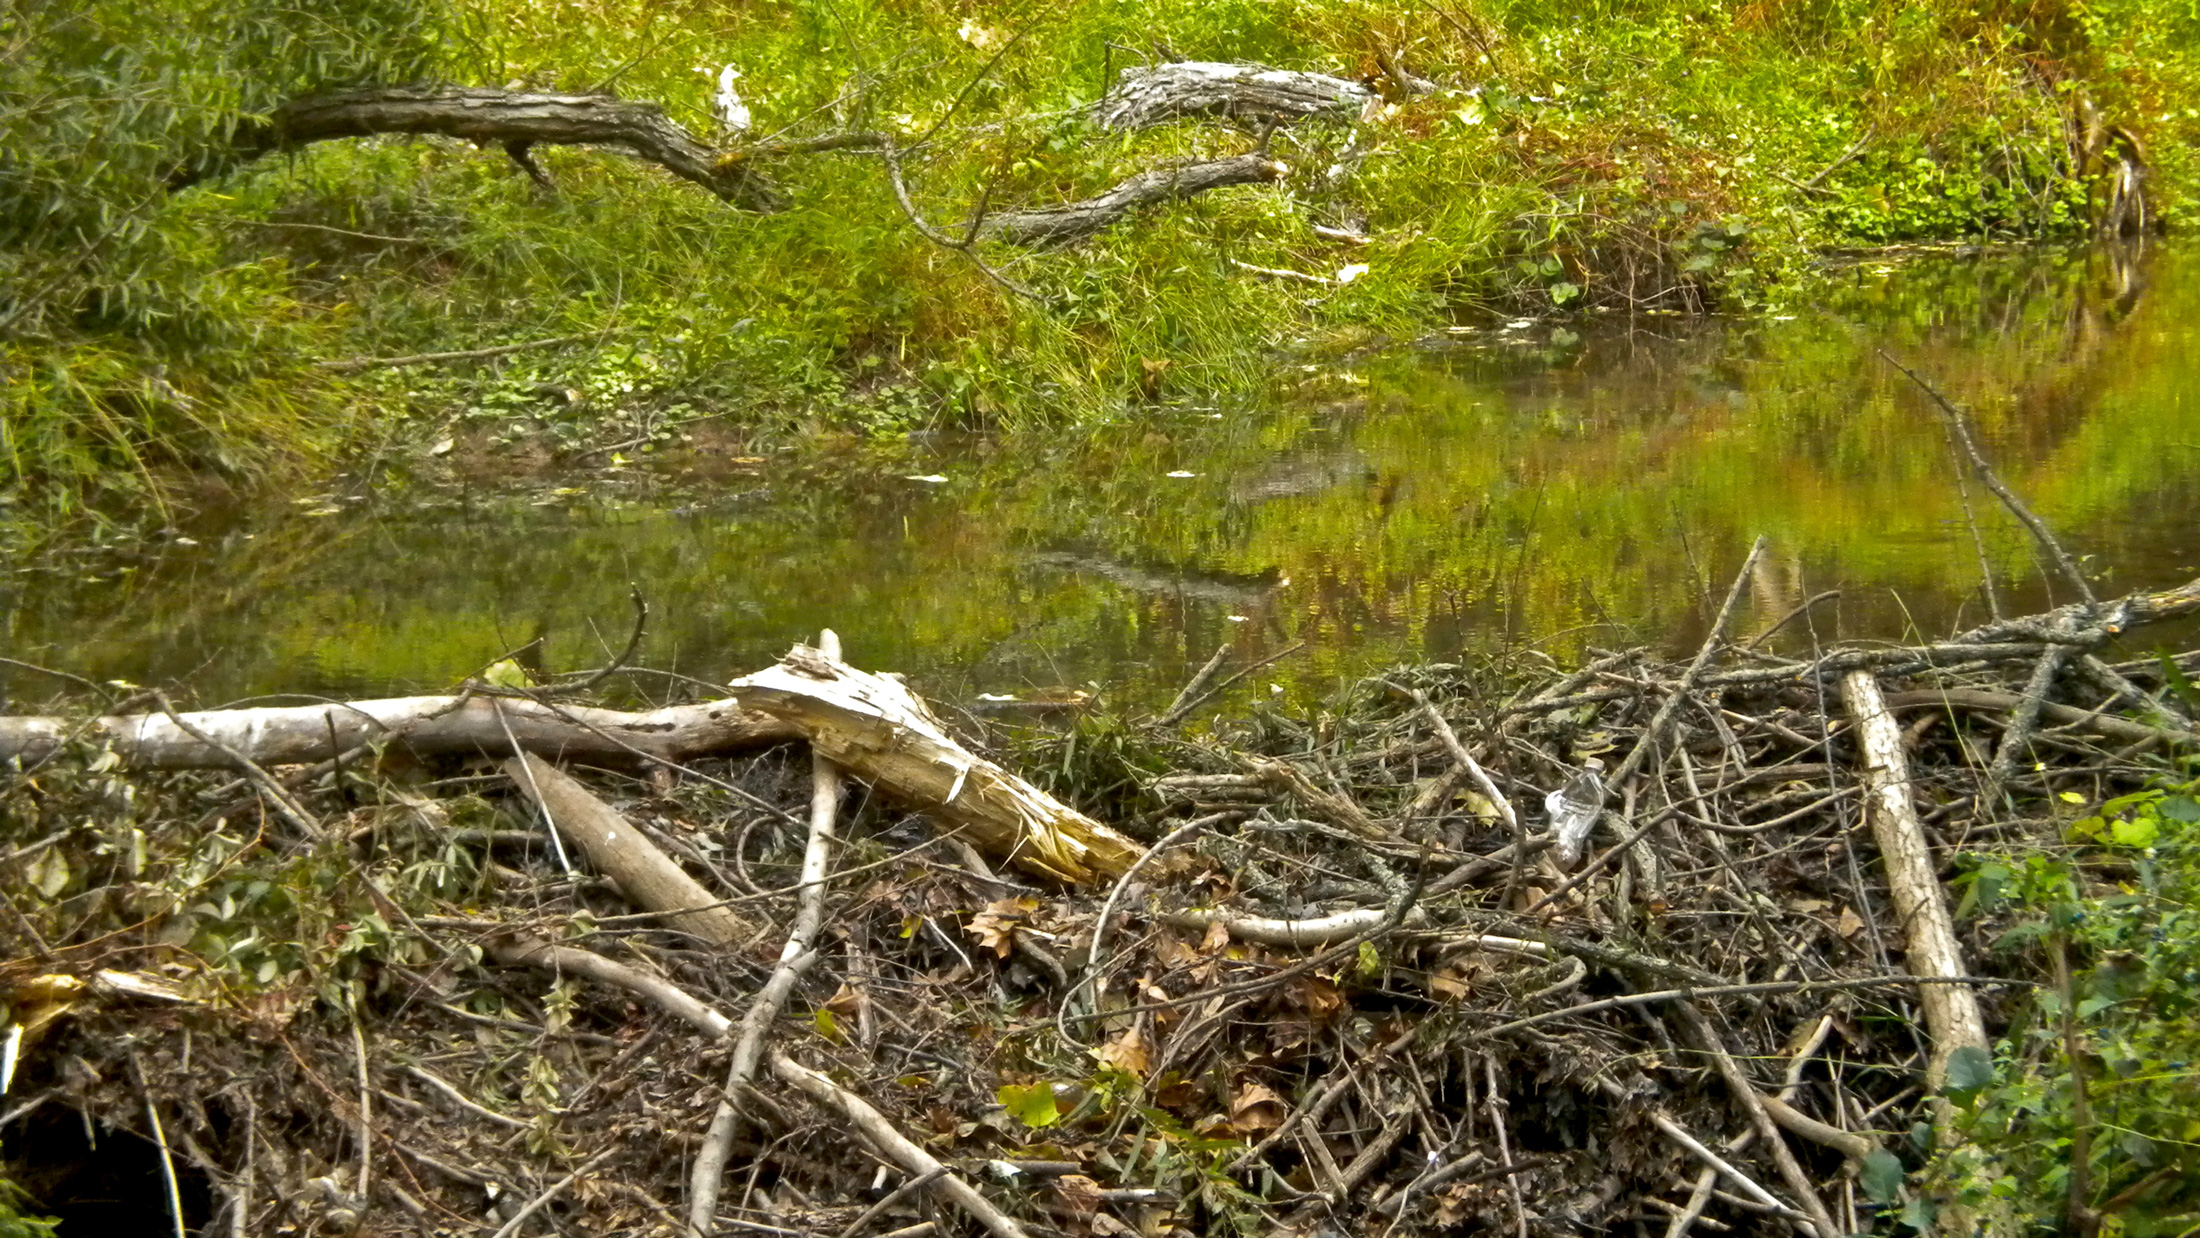 Beavers' dams flood and kill trees. Once beavers exhaust the food resources at a site, they move on to the next one. The flooding then subsides and the forest begins to grow again. Photo © Paul / Flickr through a Creative Commons license